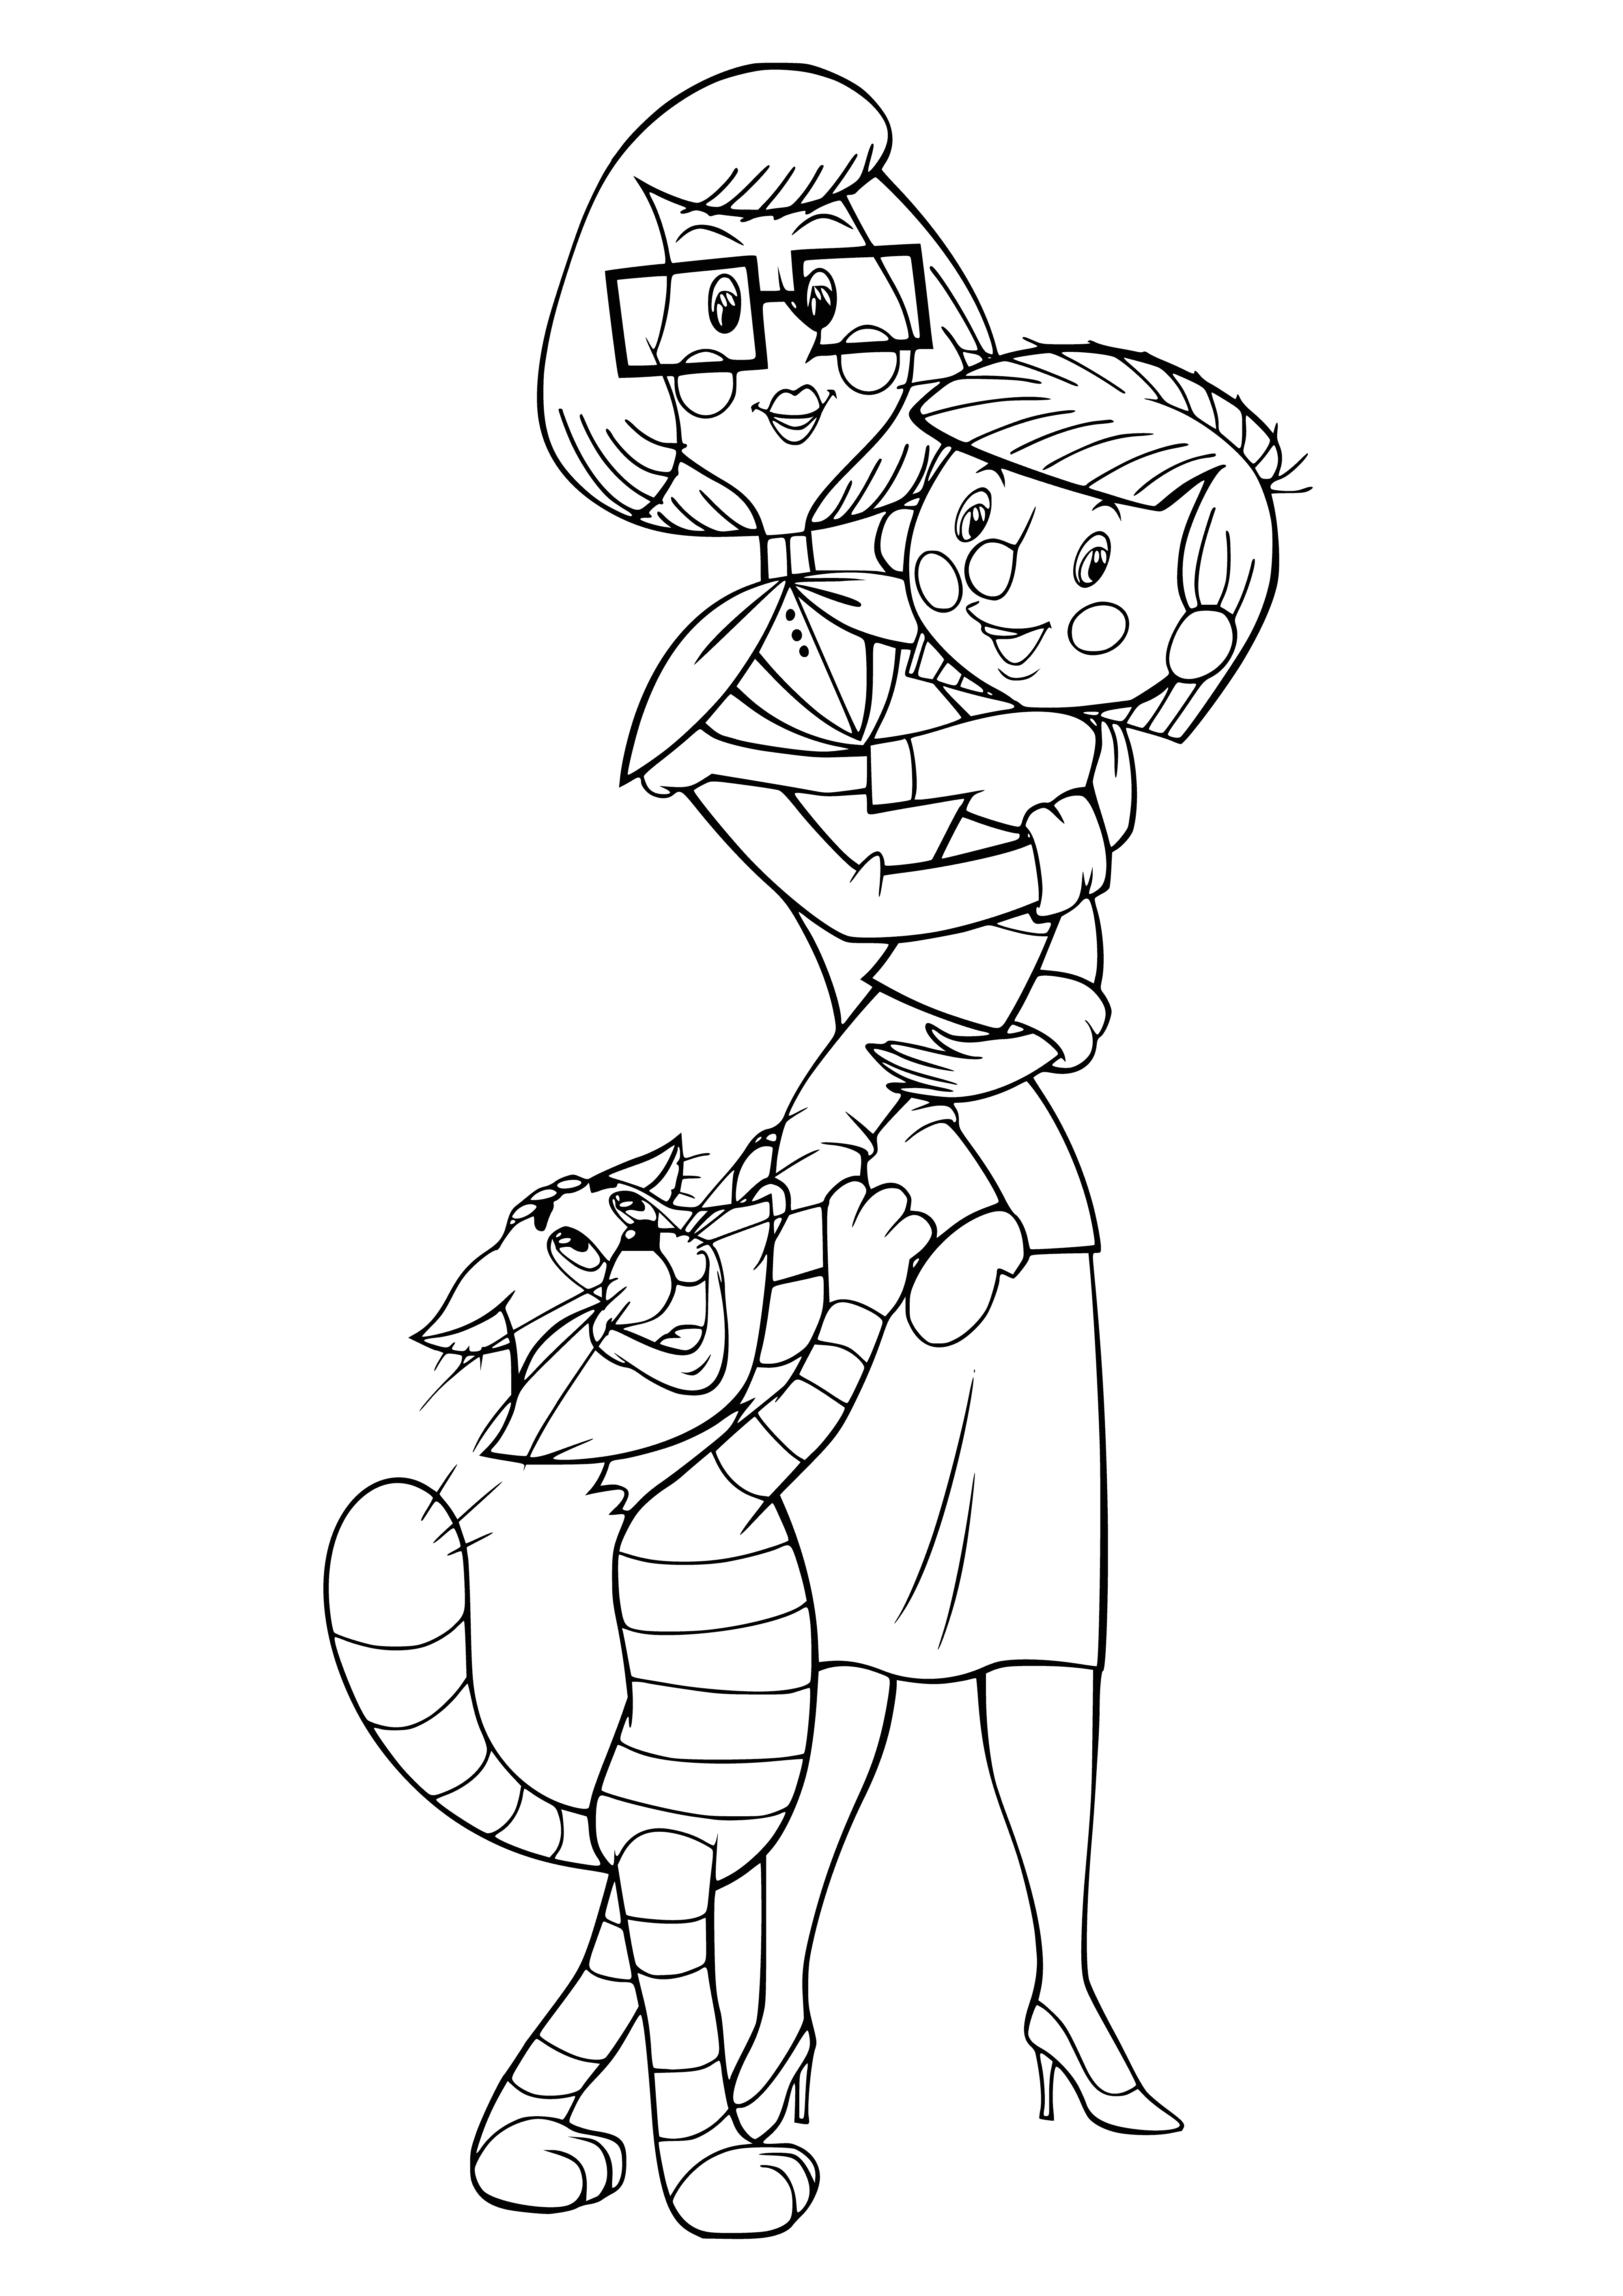 coloring page: A woman & man are standing behind & in front of a black & white cat with a yellow ribbon, the man holds a fishing rod & the woman a basket.